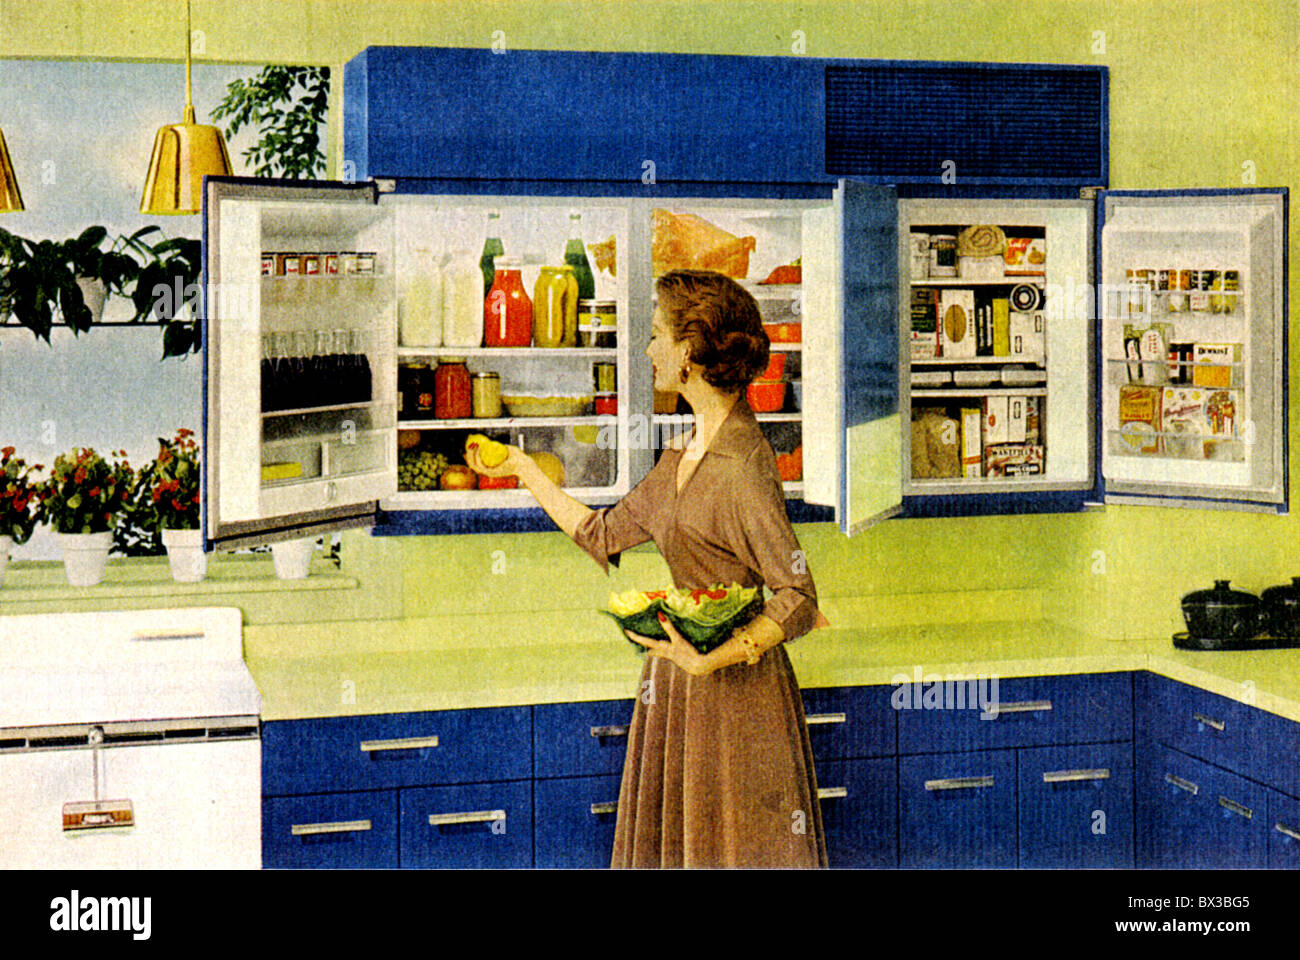 AMERICAN KITCHEN about 1958 Stock Photo